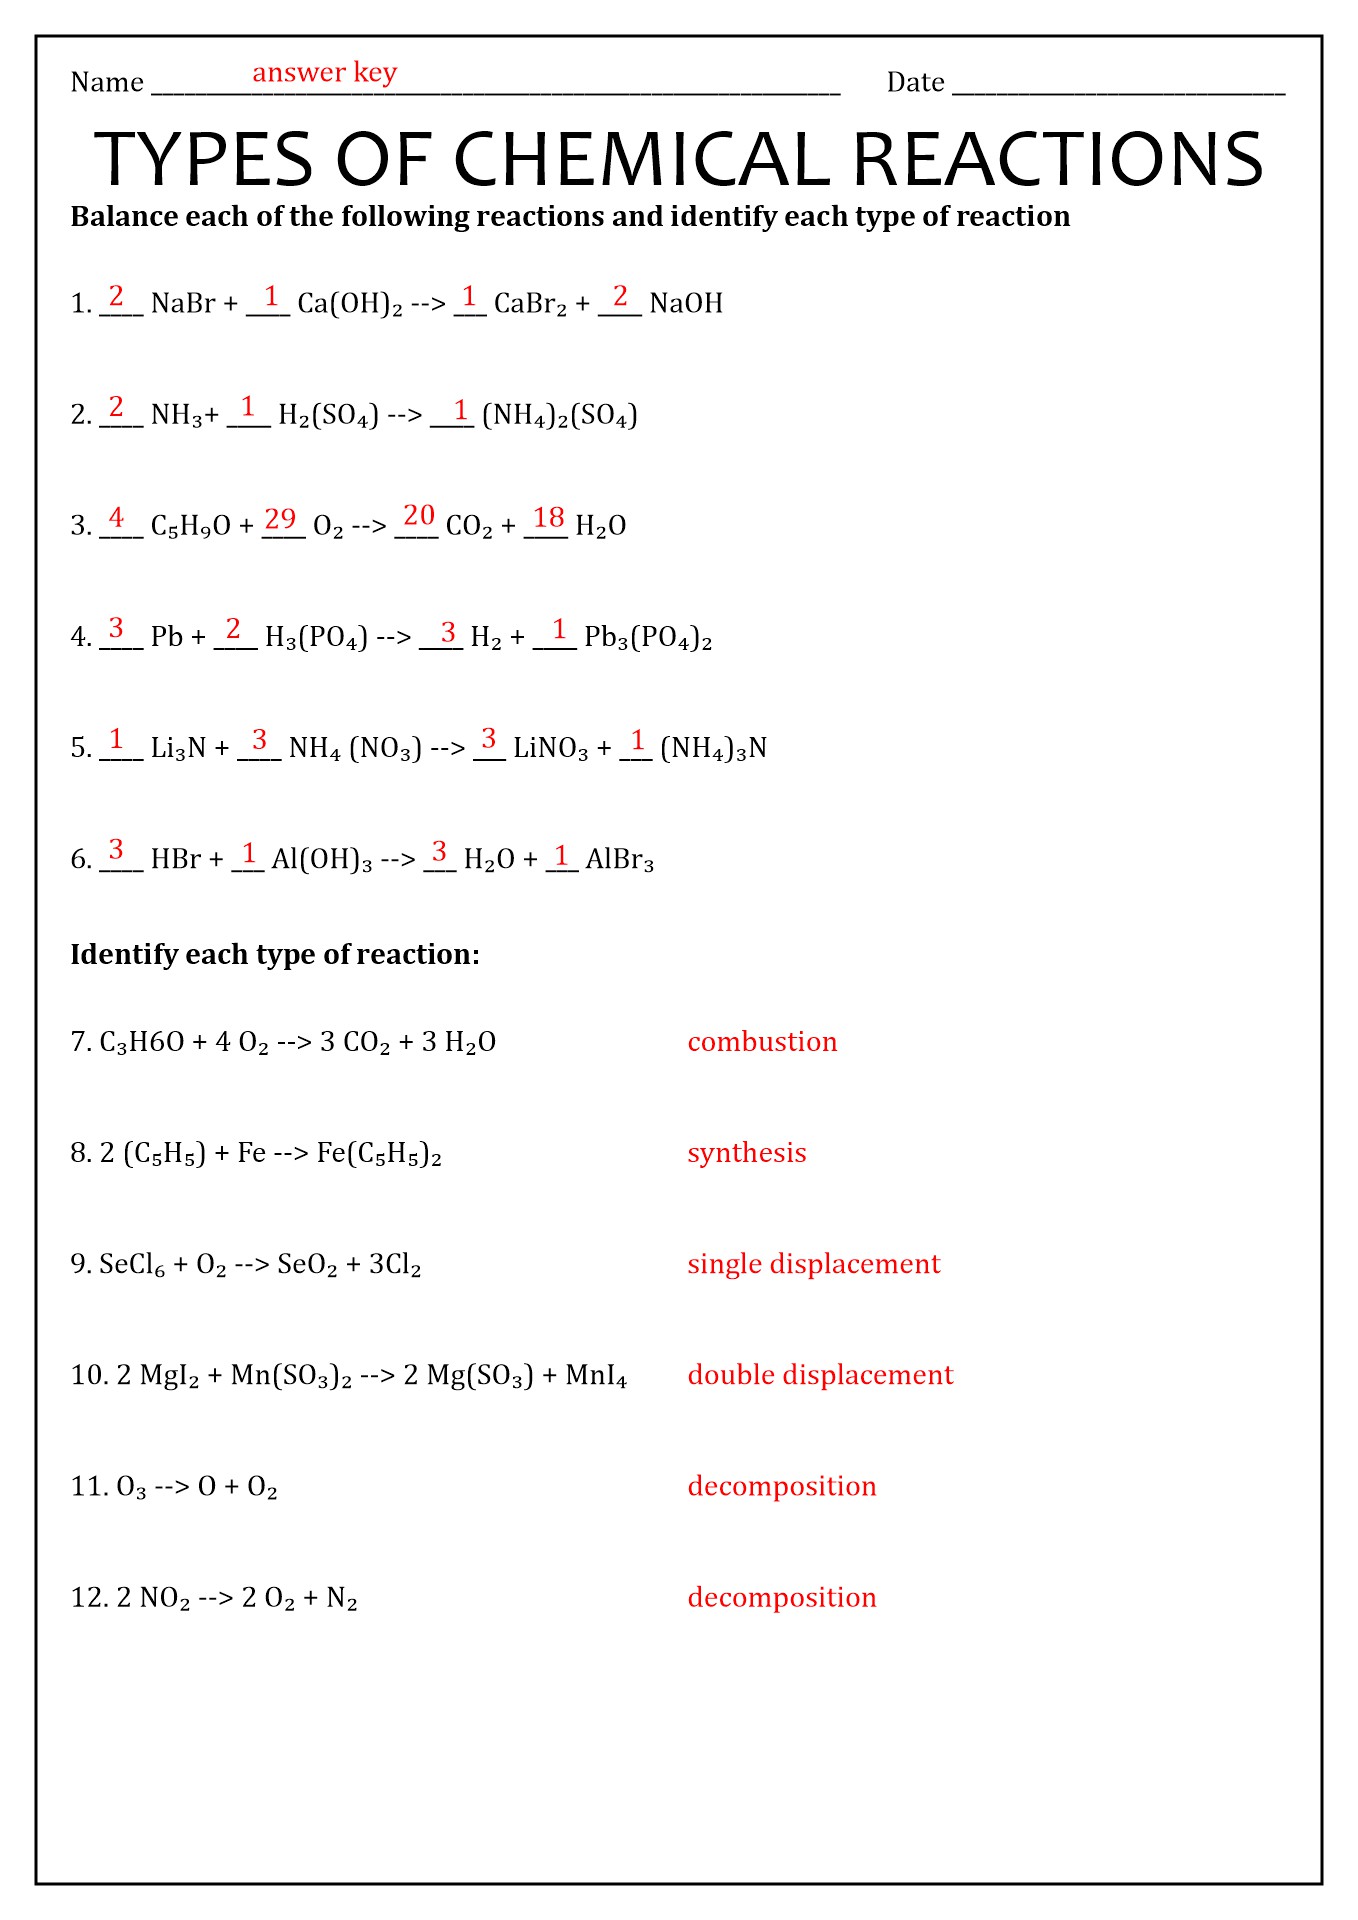 types-of-reactions-worksheet-answers-free-download-gmbar-co